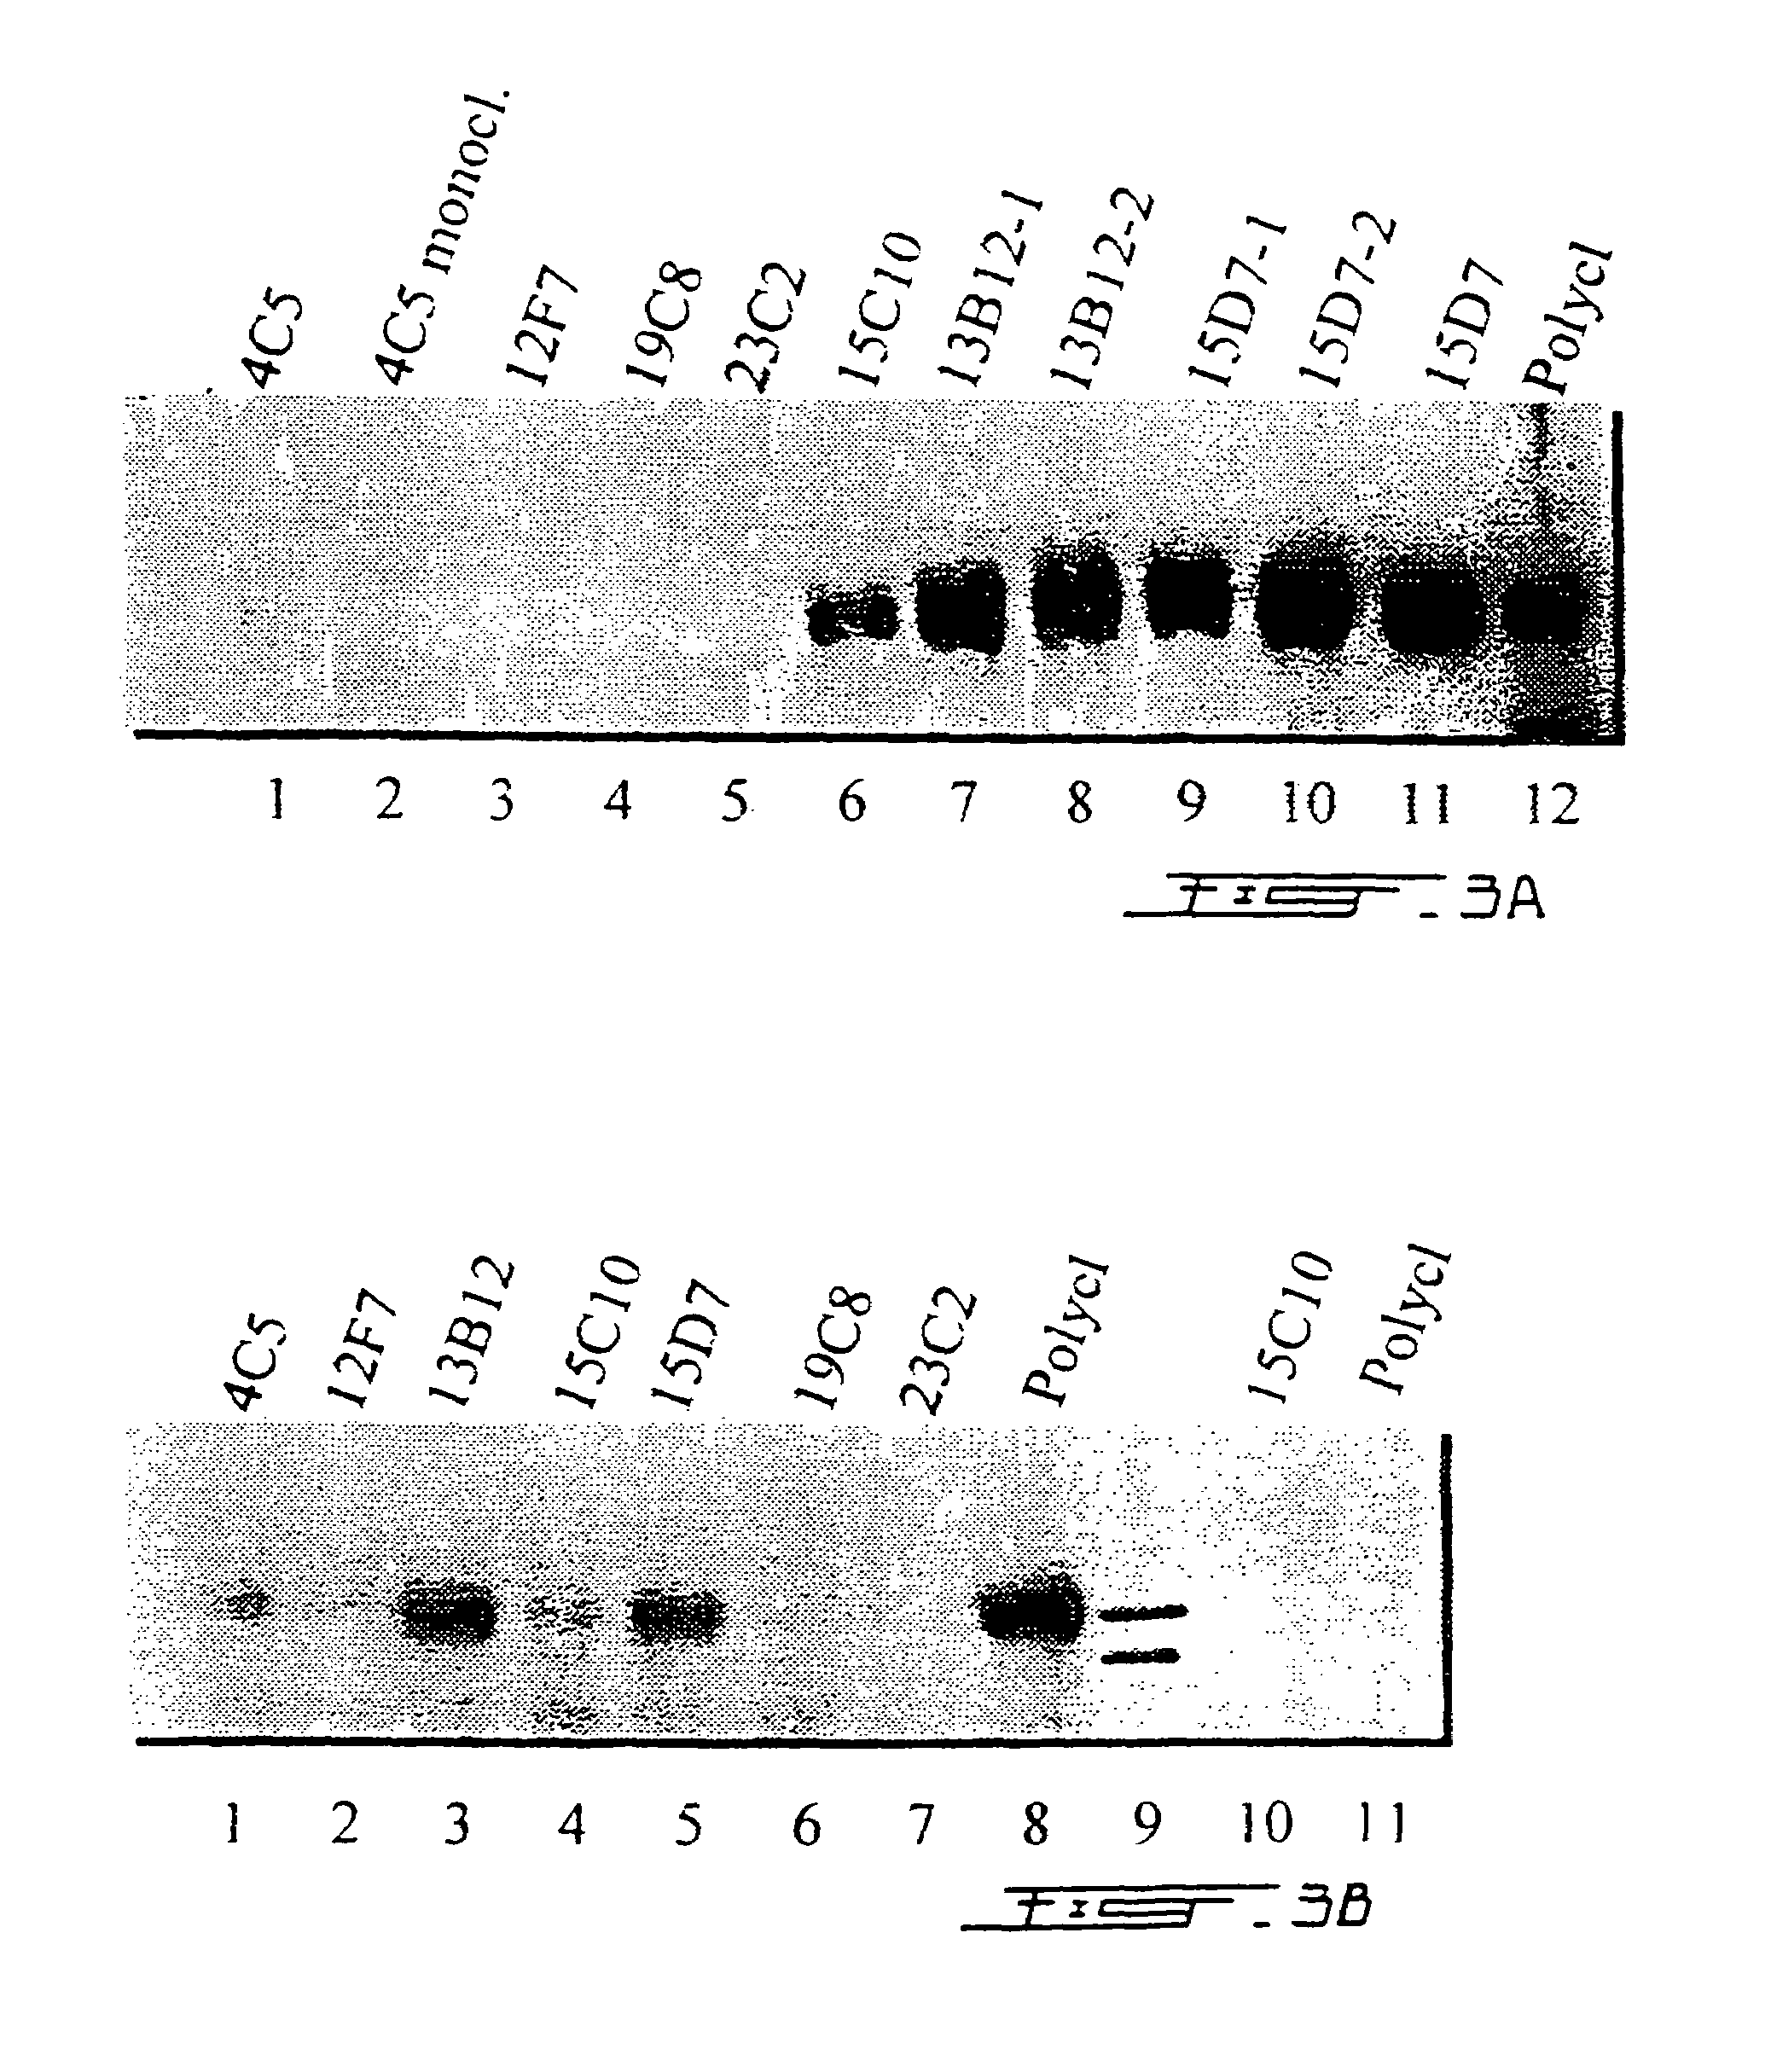 Composition, methods and reagents for the synthesis of a soluble form of human PHEX